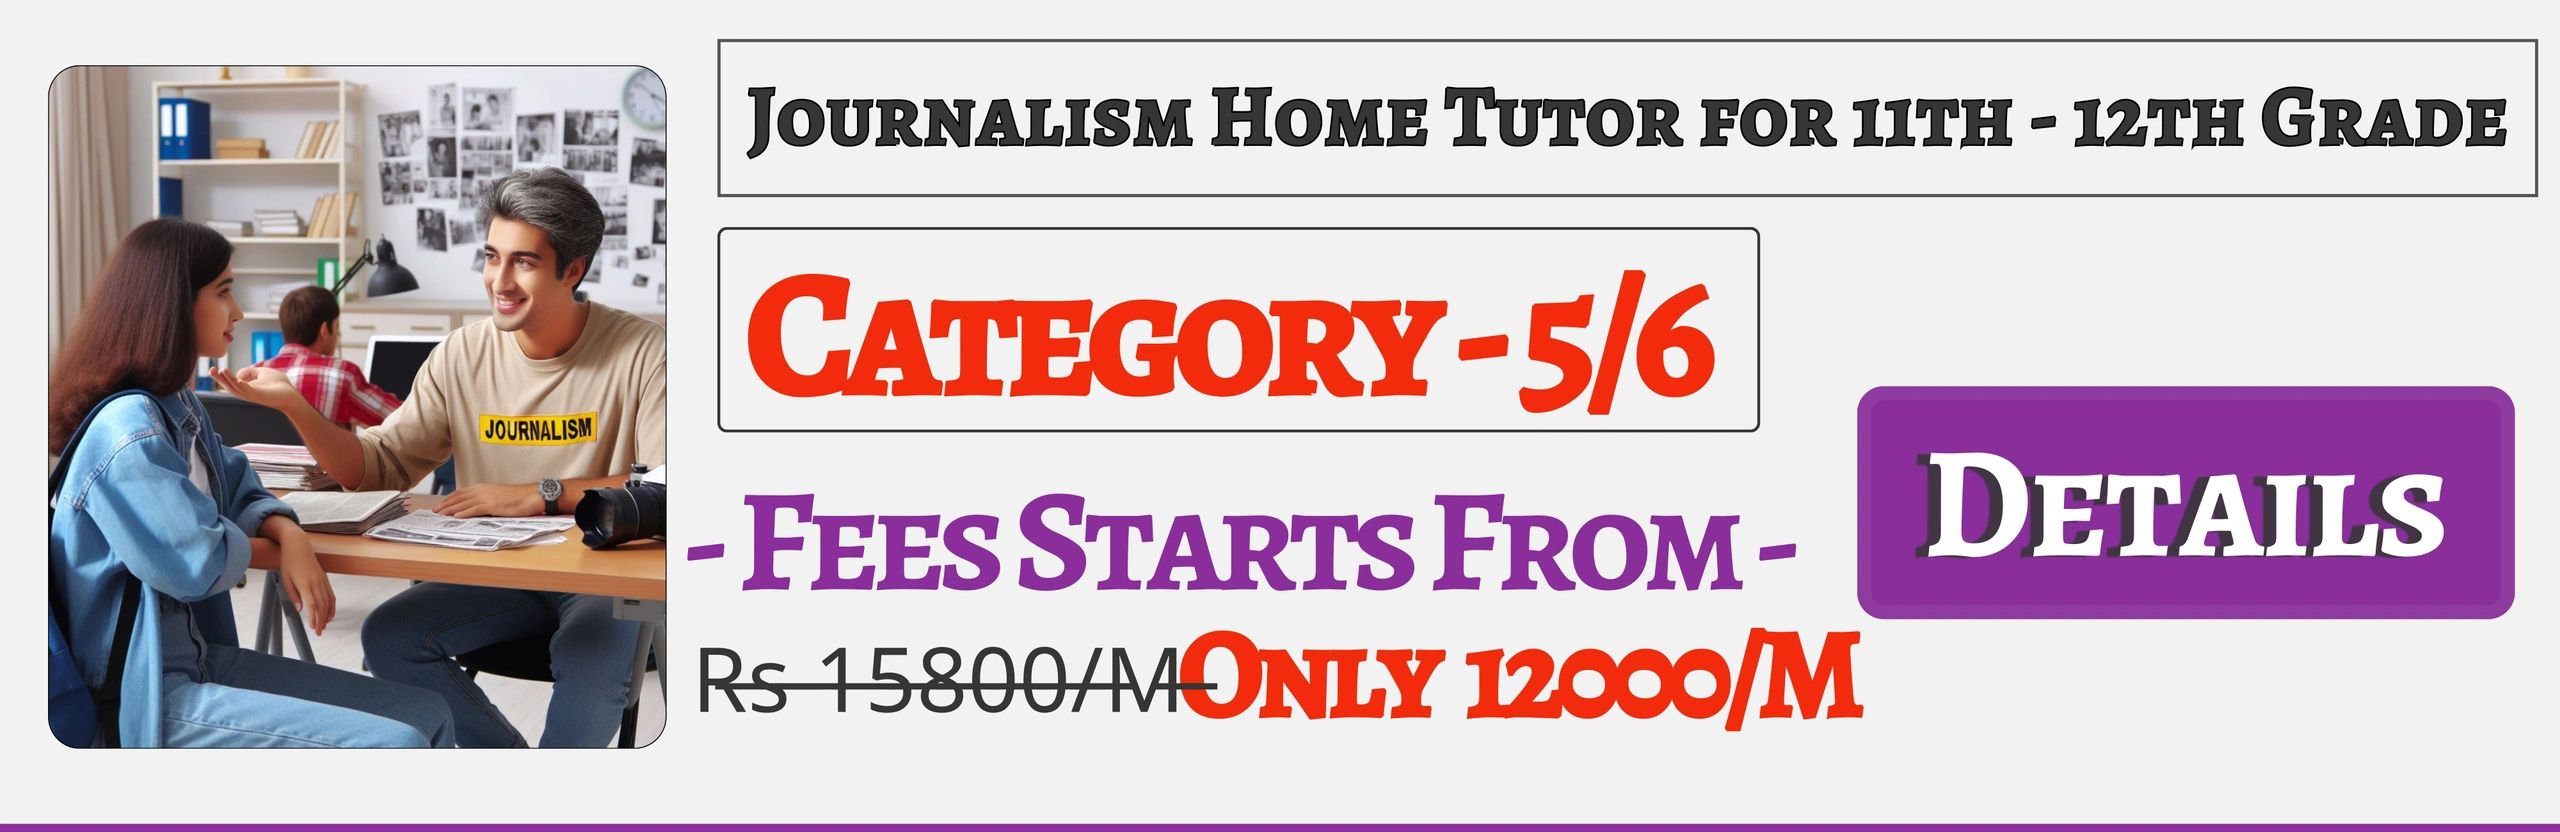 Book Best Nearby Journalism Home Tuition Tutors For 11th & 12th In Jaipur , Fees Only 12000/M